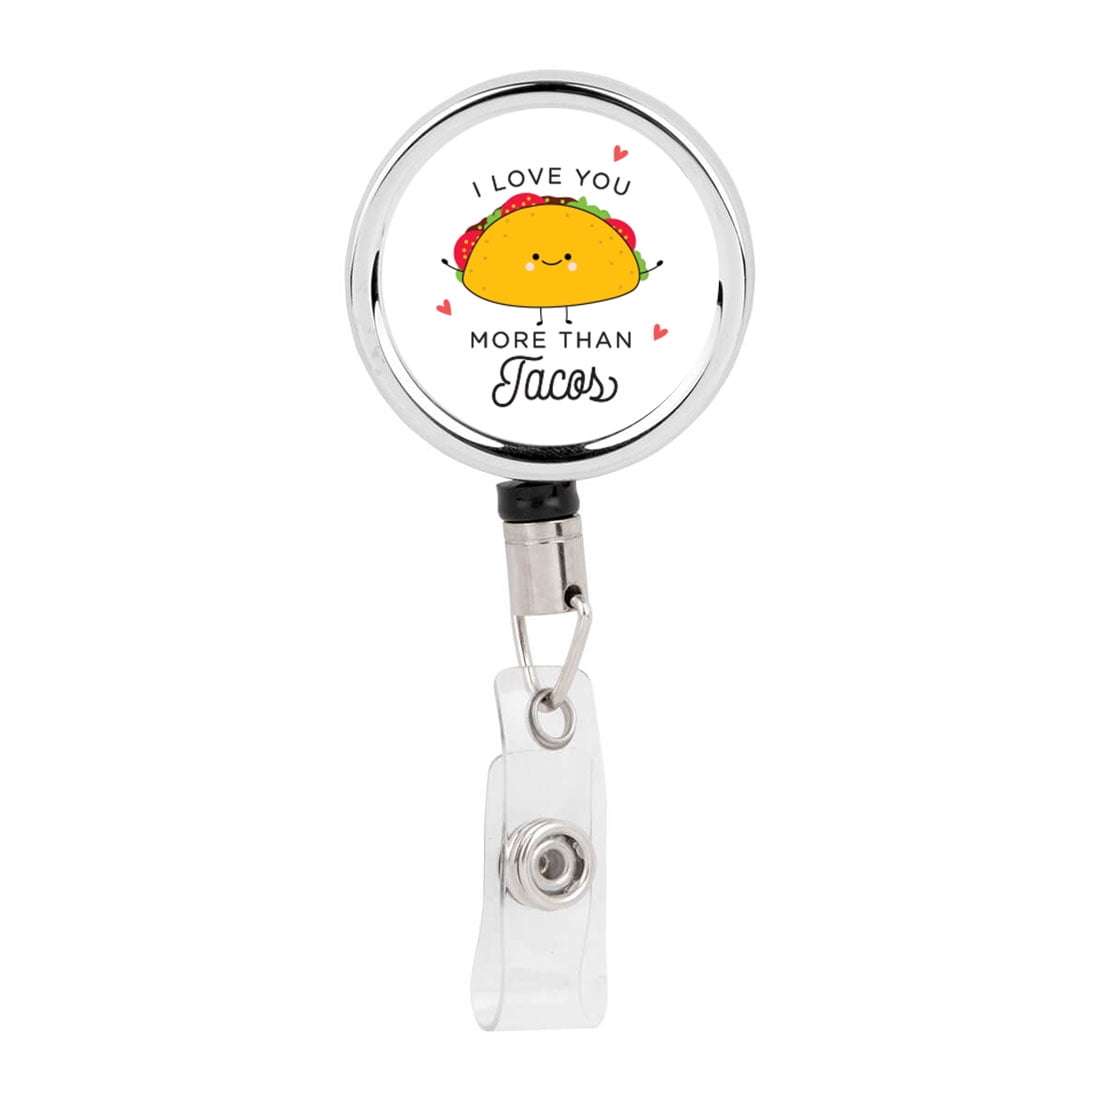 Koyal Wholesale Retractable Badge Reel Holder With Clip, I Love